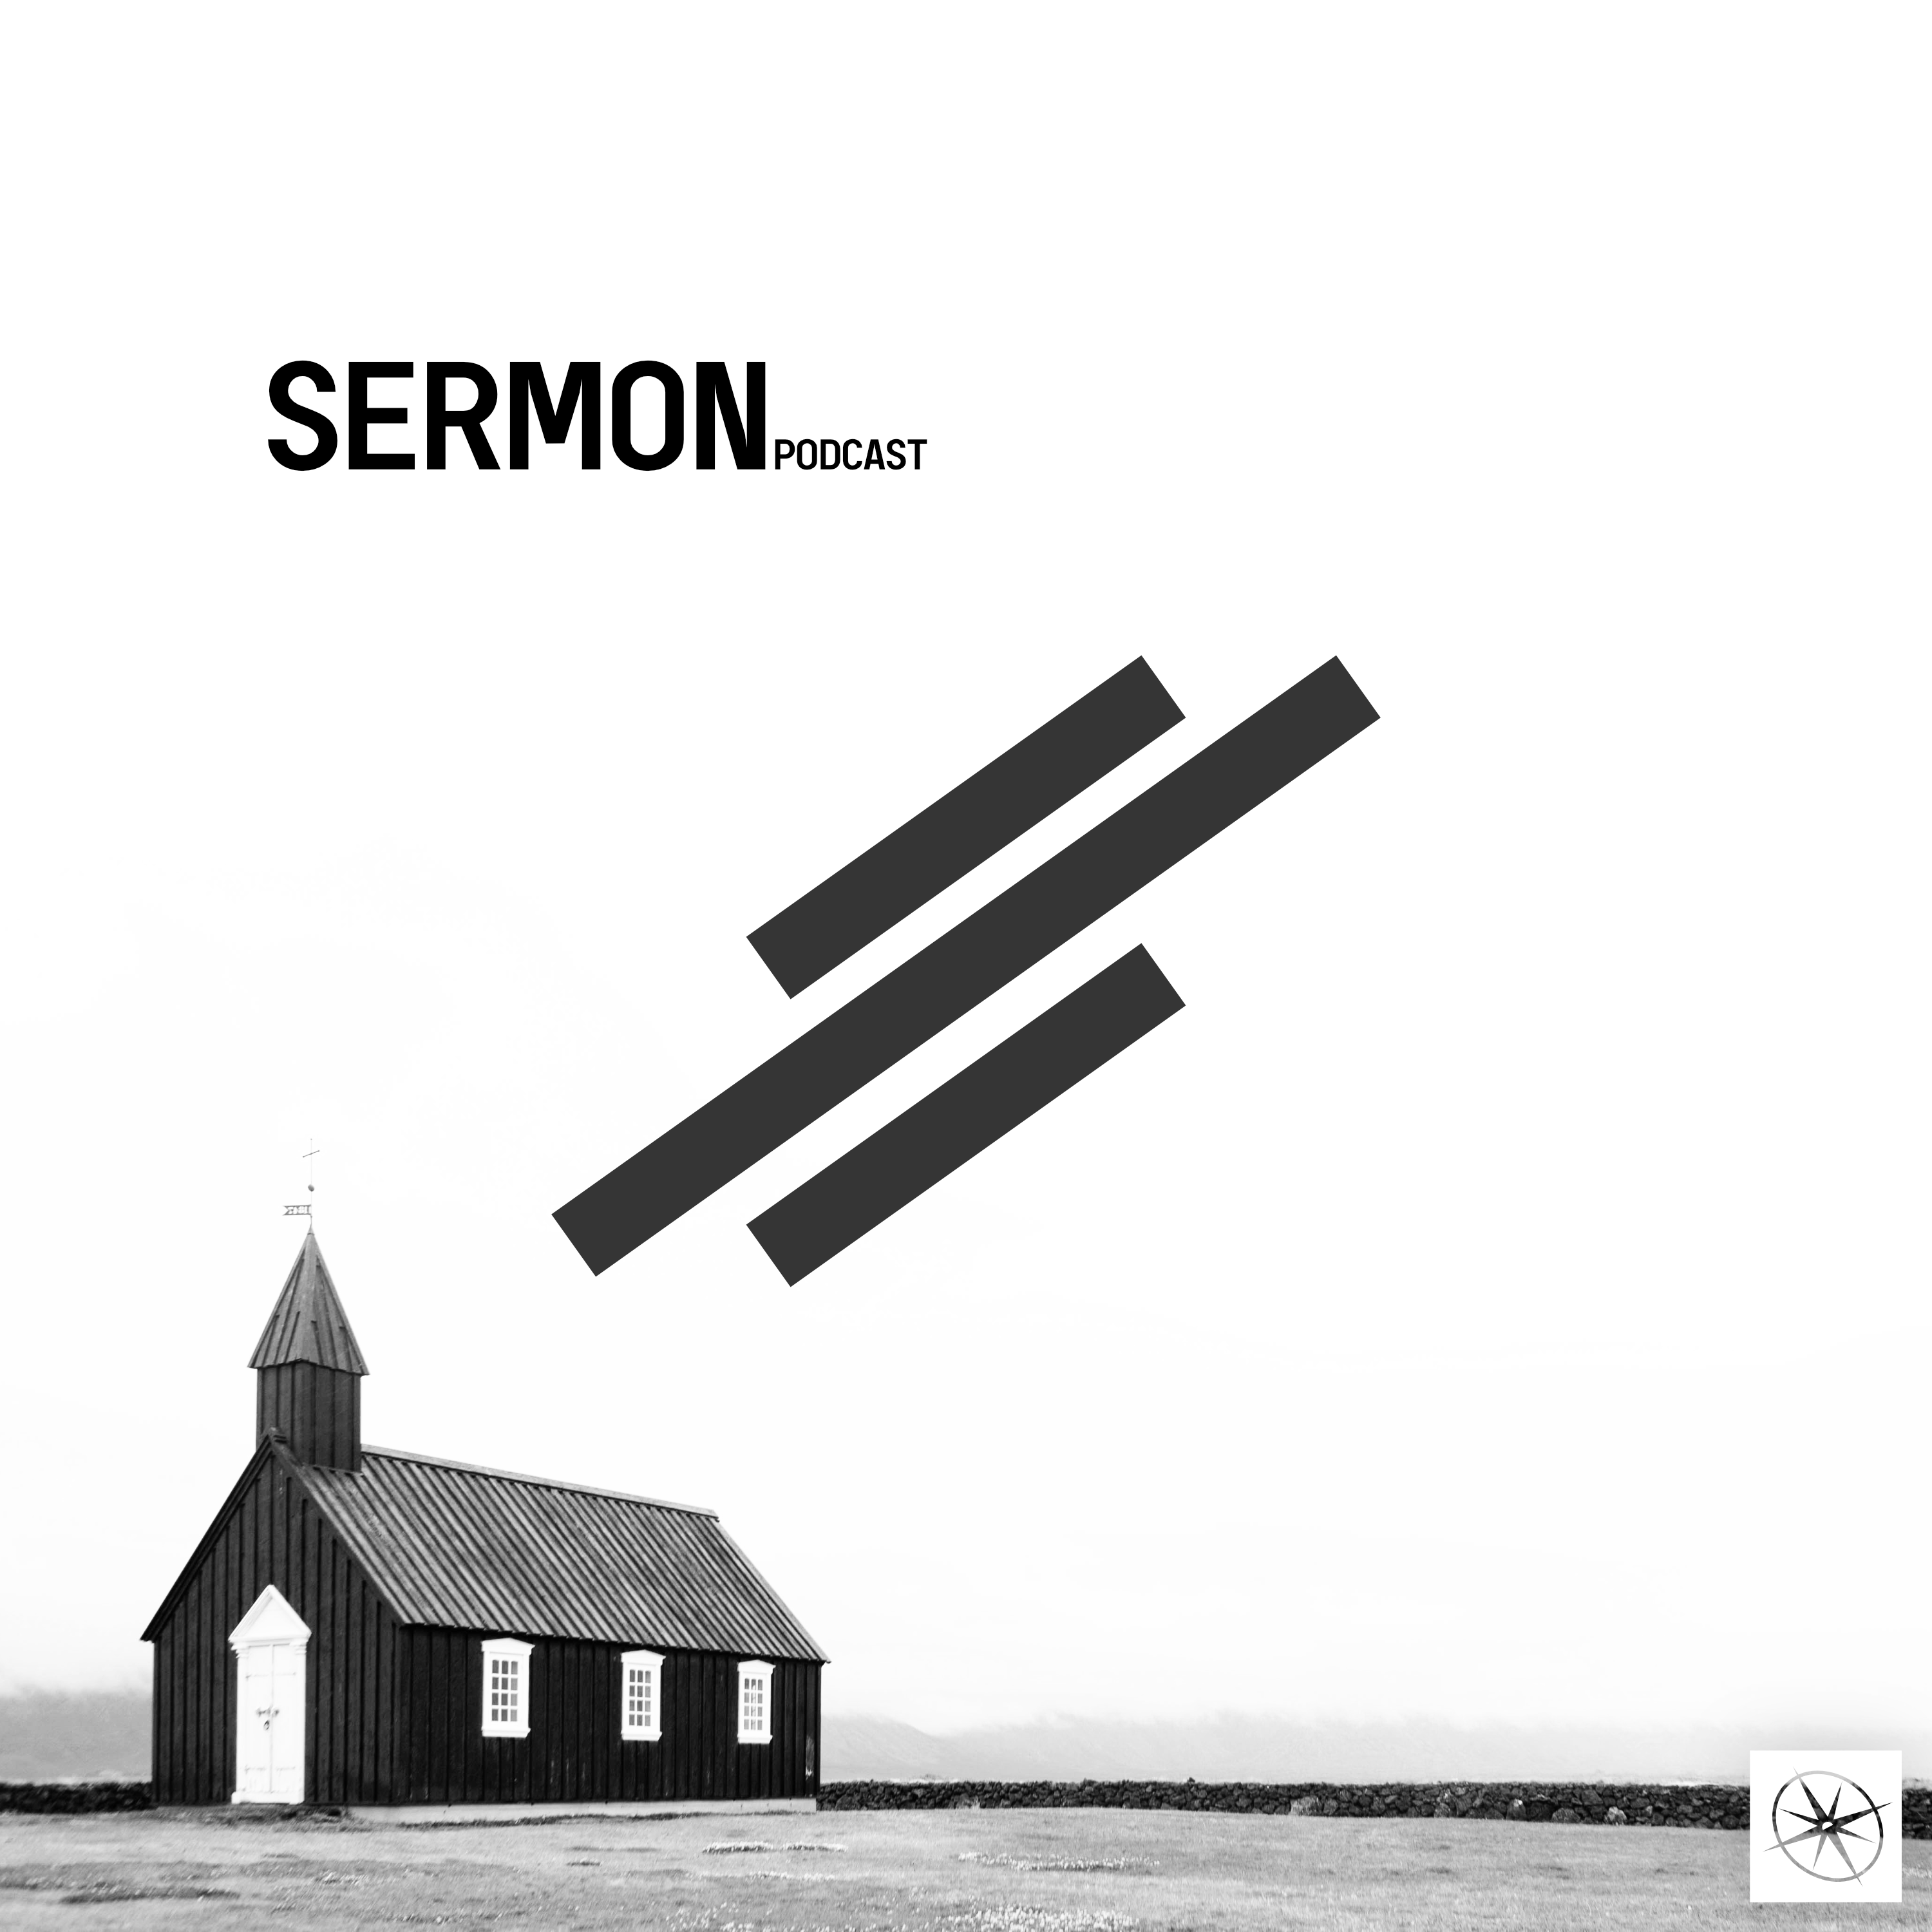 Artwork for Weekend Sermons Podcast